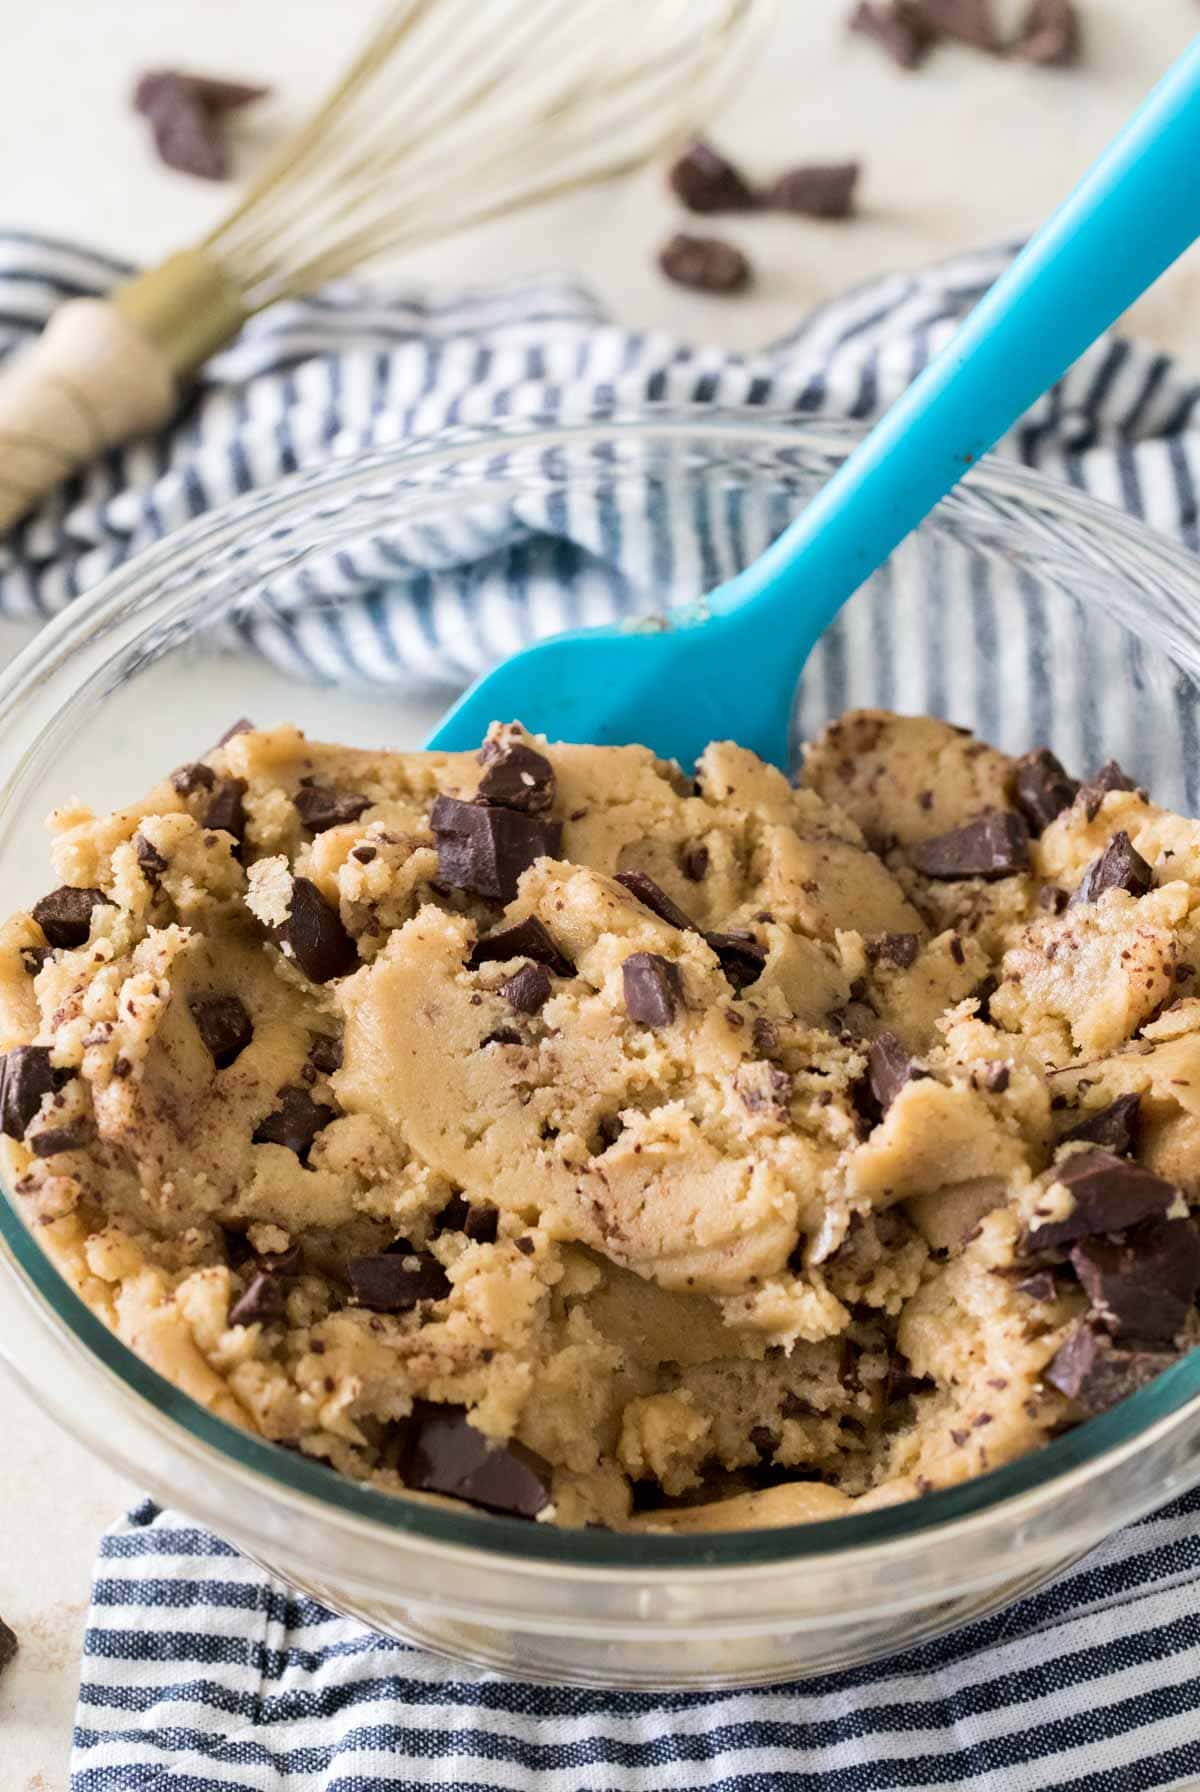 Bowl of chocolate chip cookie dough with a blue silicone spatula resting in it.